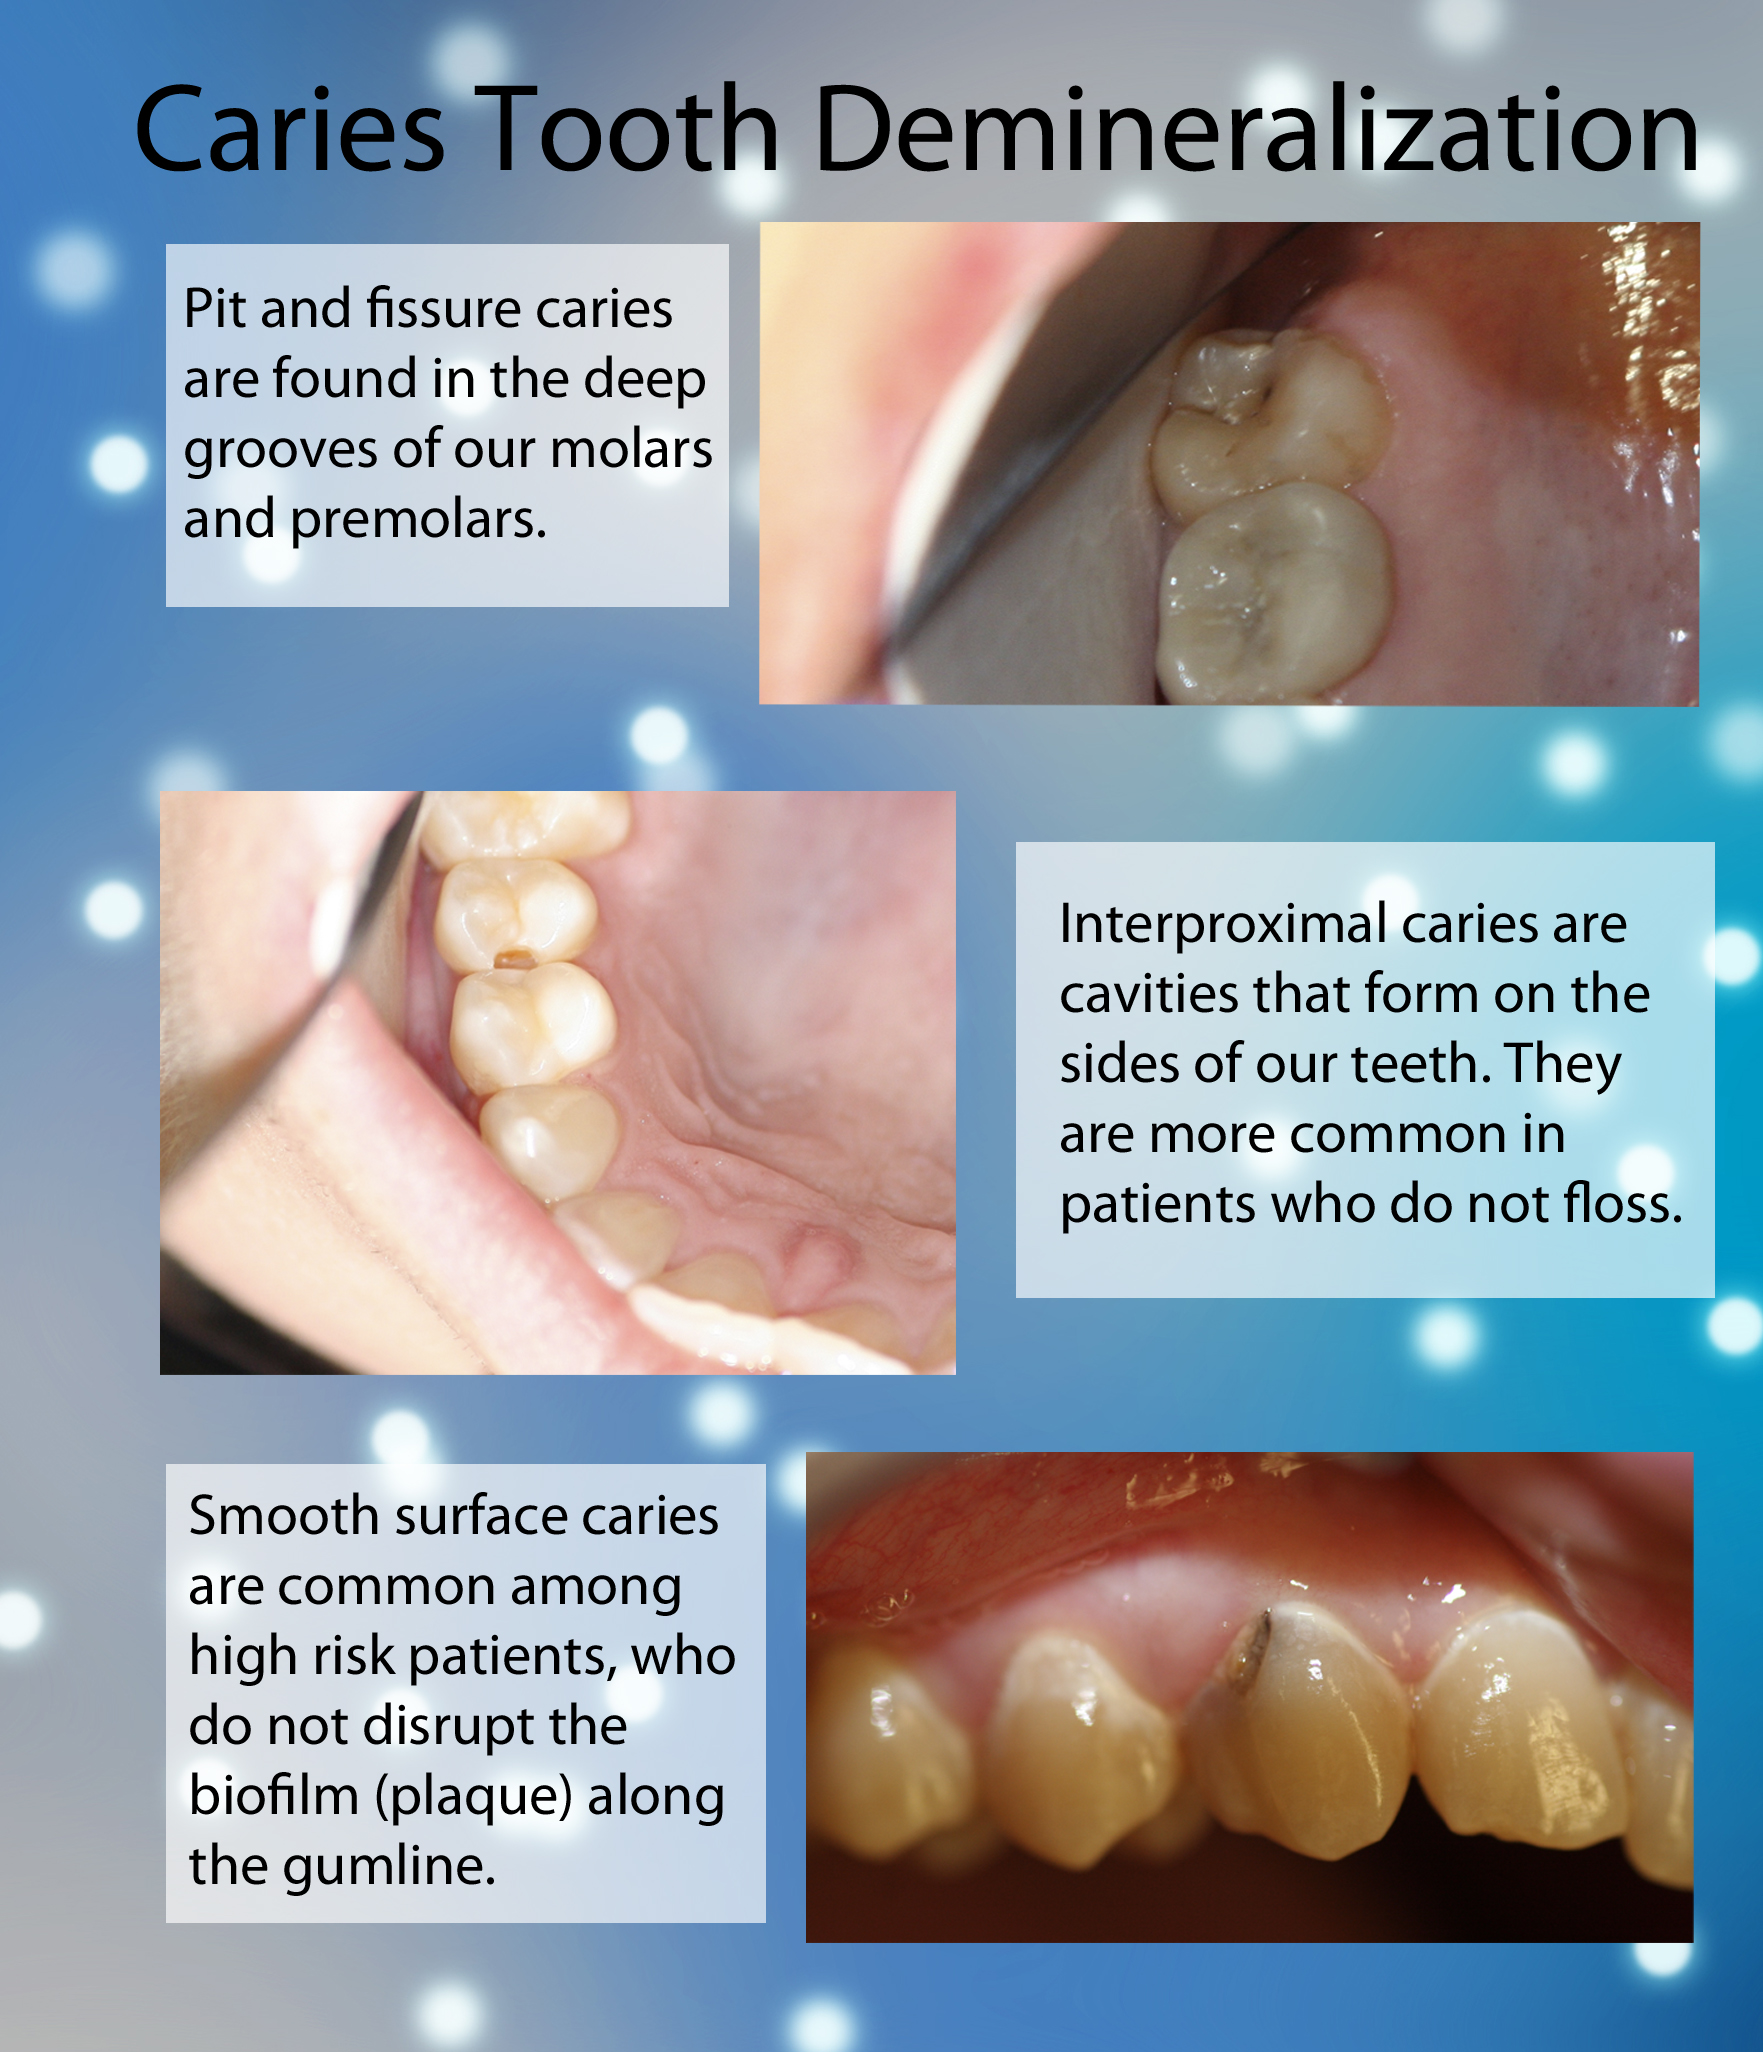 Caries & Tooth Demineralization